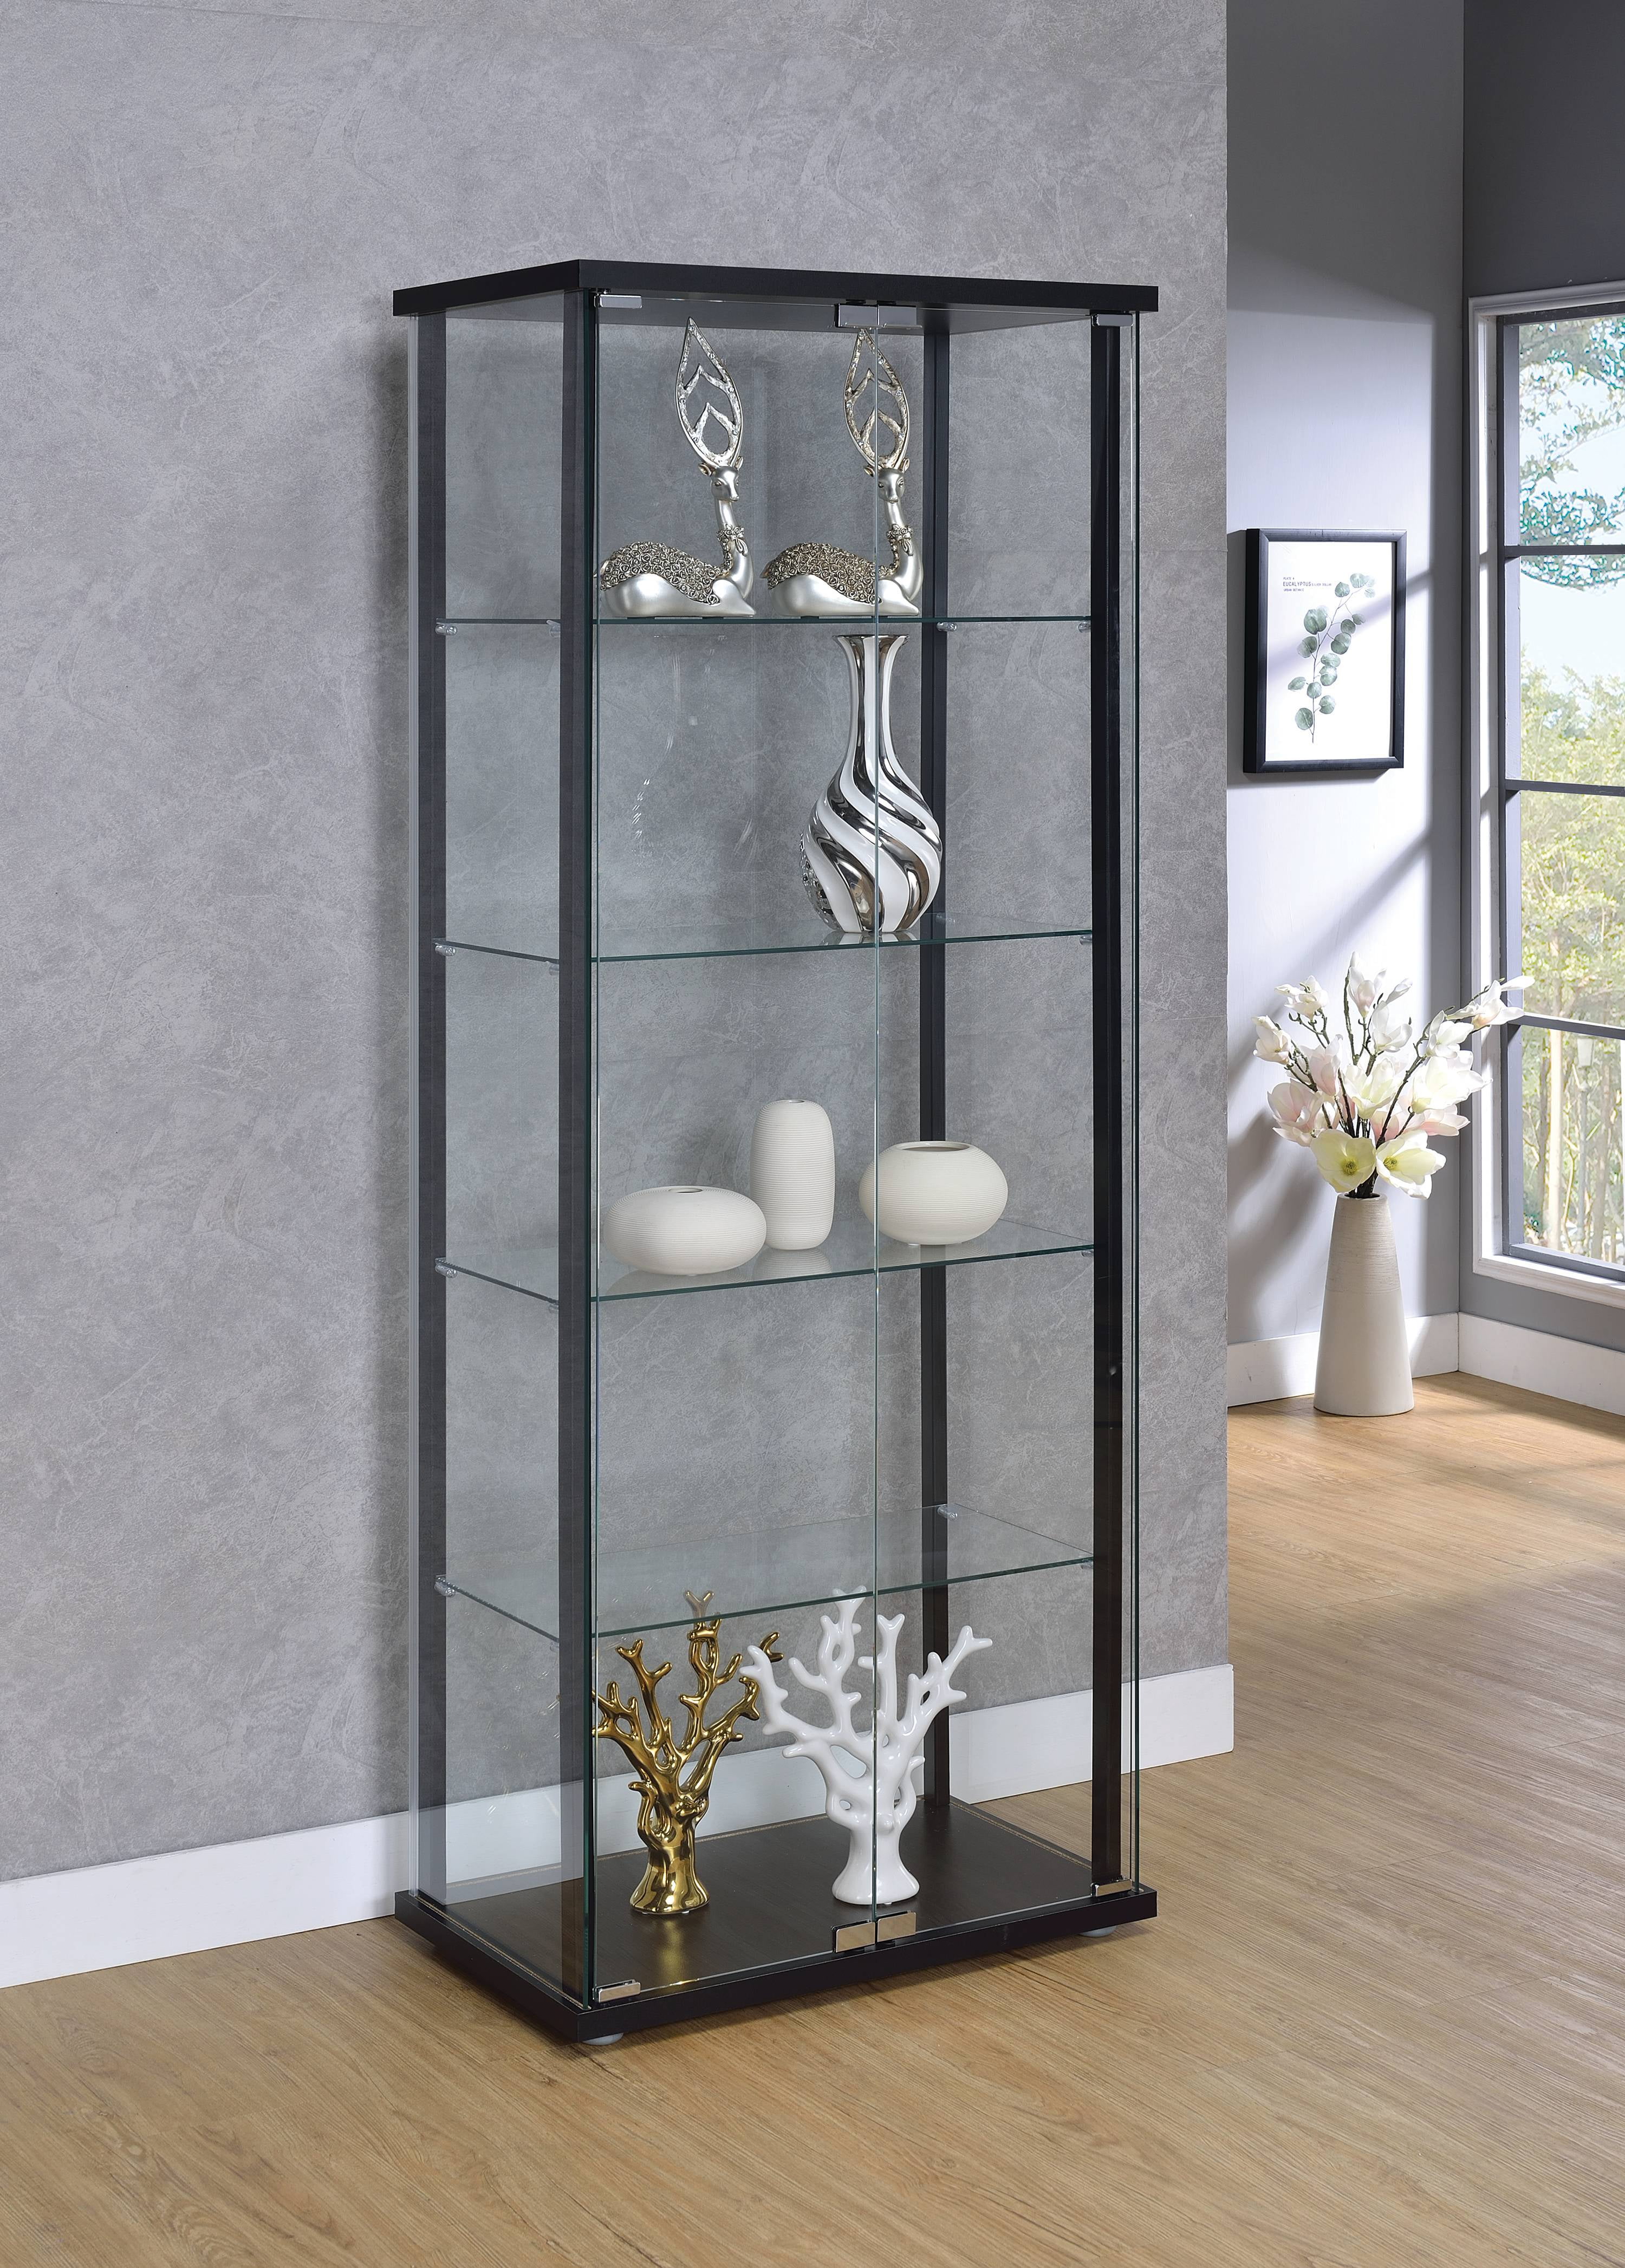 Curio Storage Display Tall Tower Cabinet Black With Four Glass Shelves Furniture 